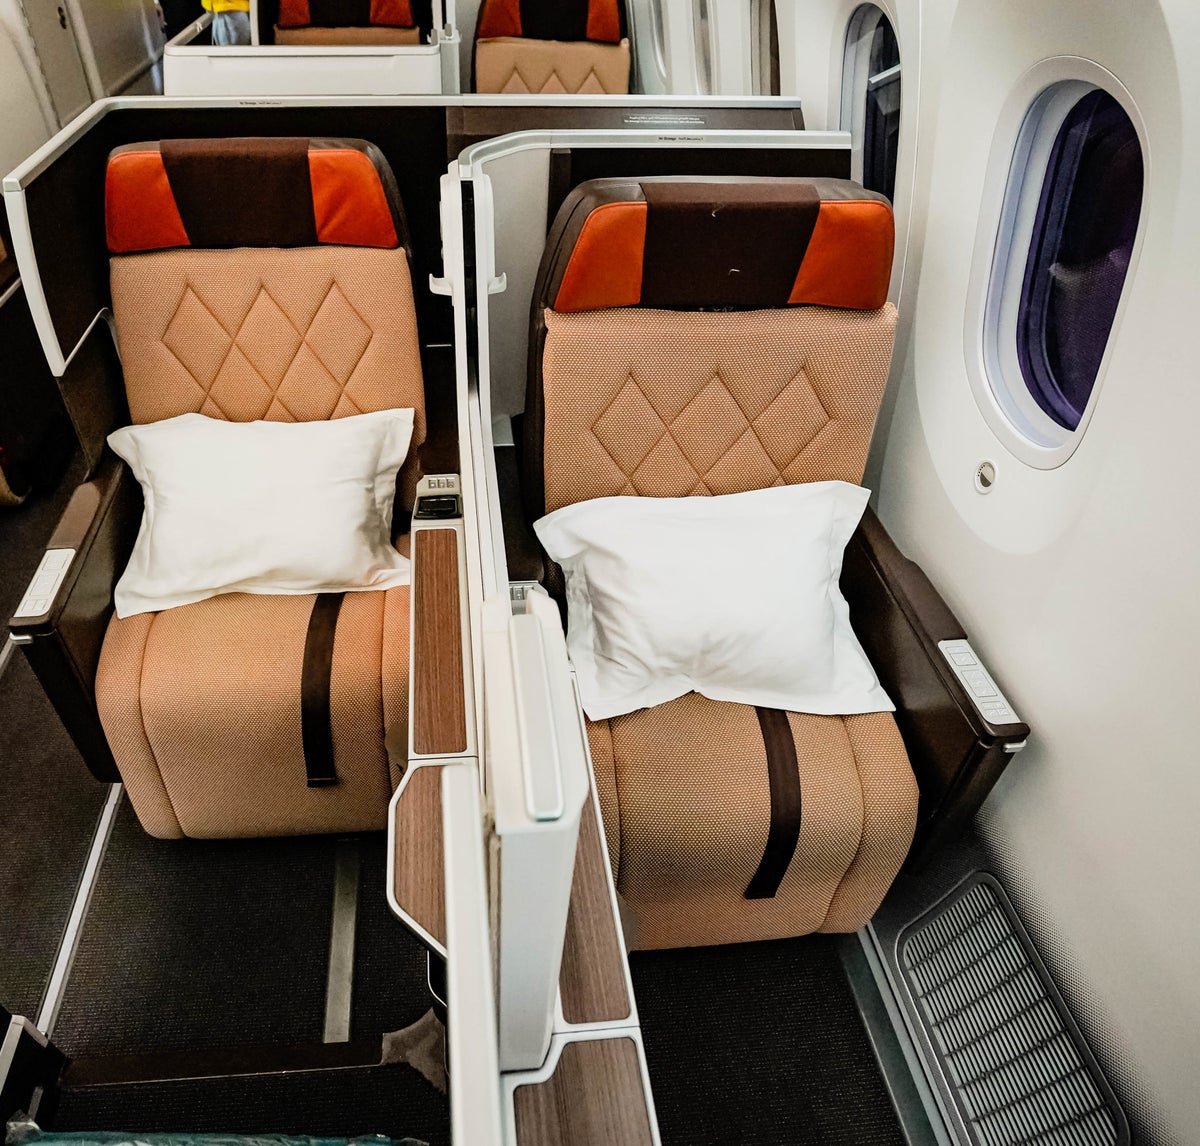 Oman Air B787-9 Business Class --- Apex Suites 12A and 12B